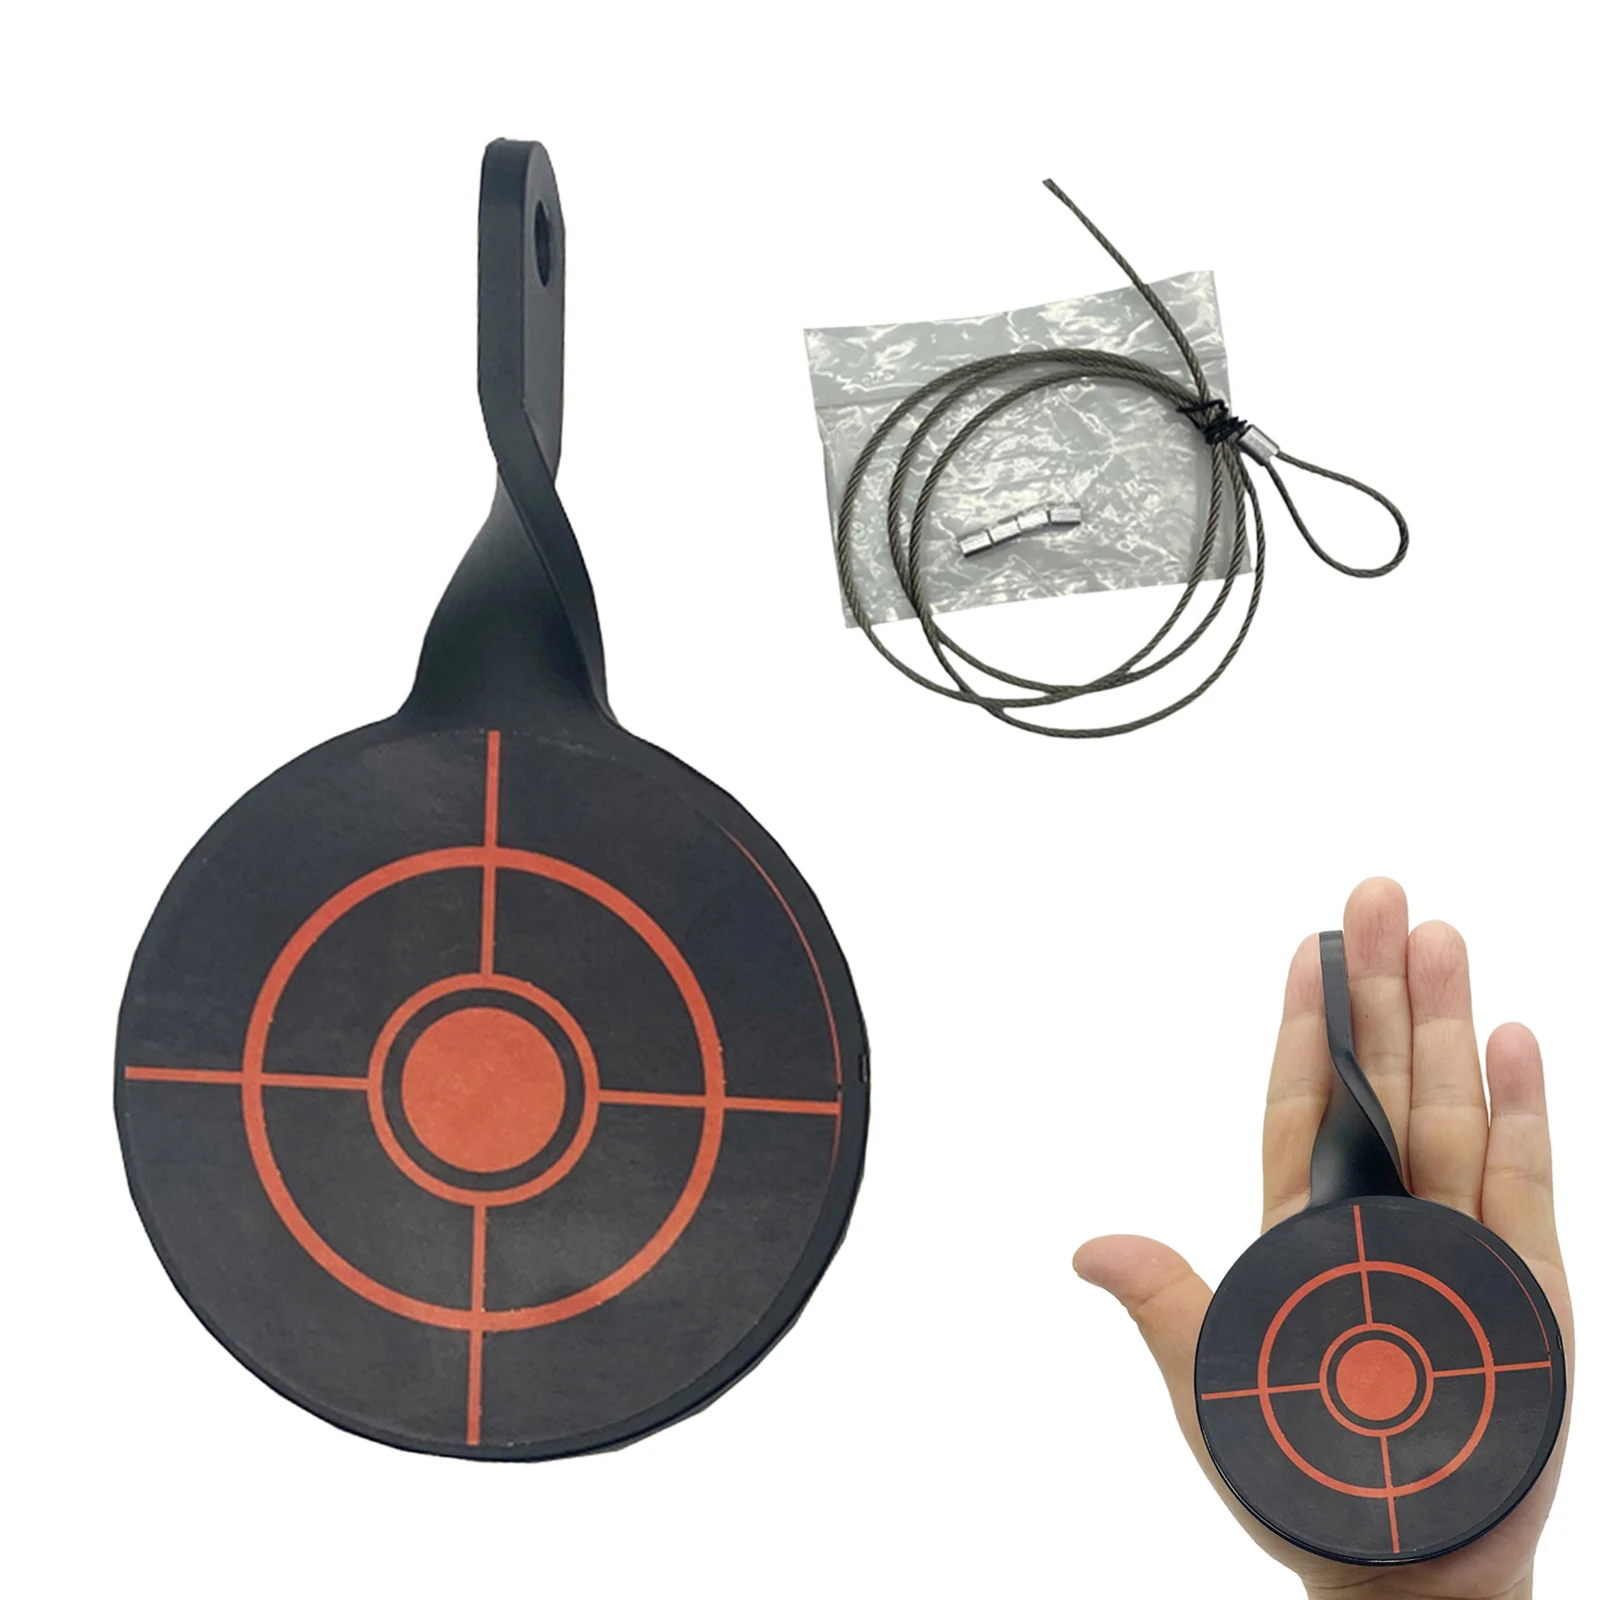 Dia 8cm Shooting Target Stainless Steel Target Hunting Catapult Paintball Archery Bow Training Target Hunting Accessories